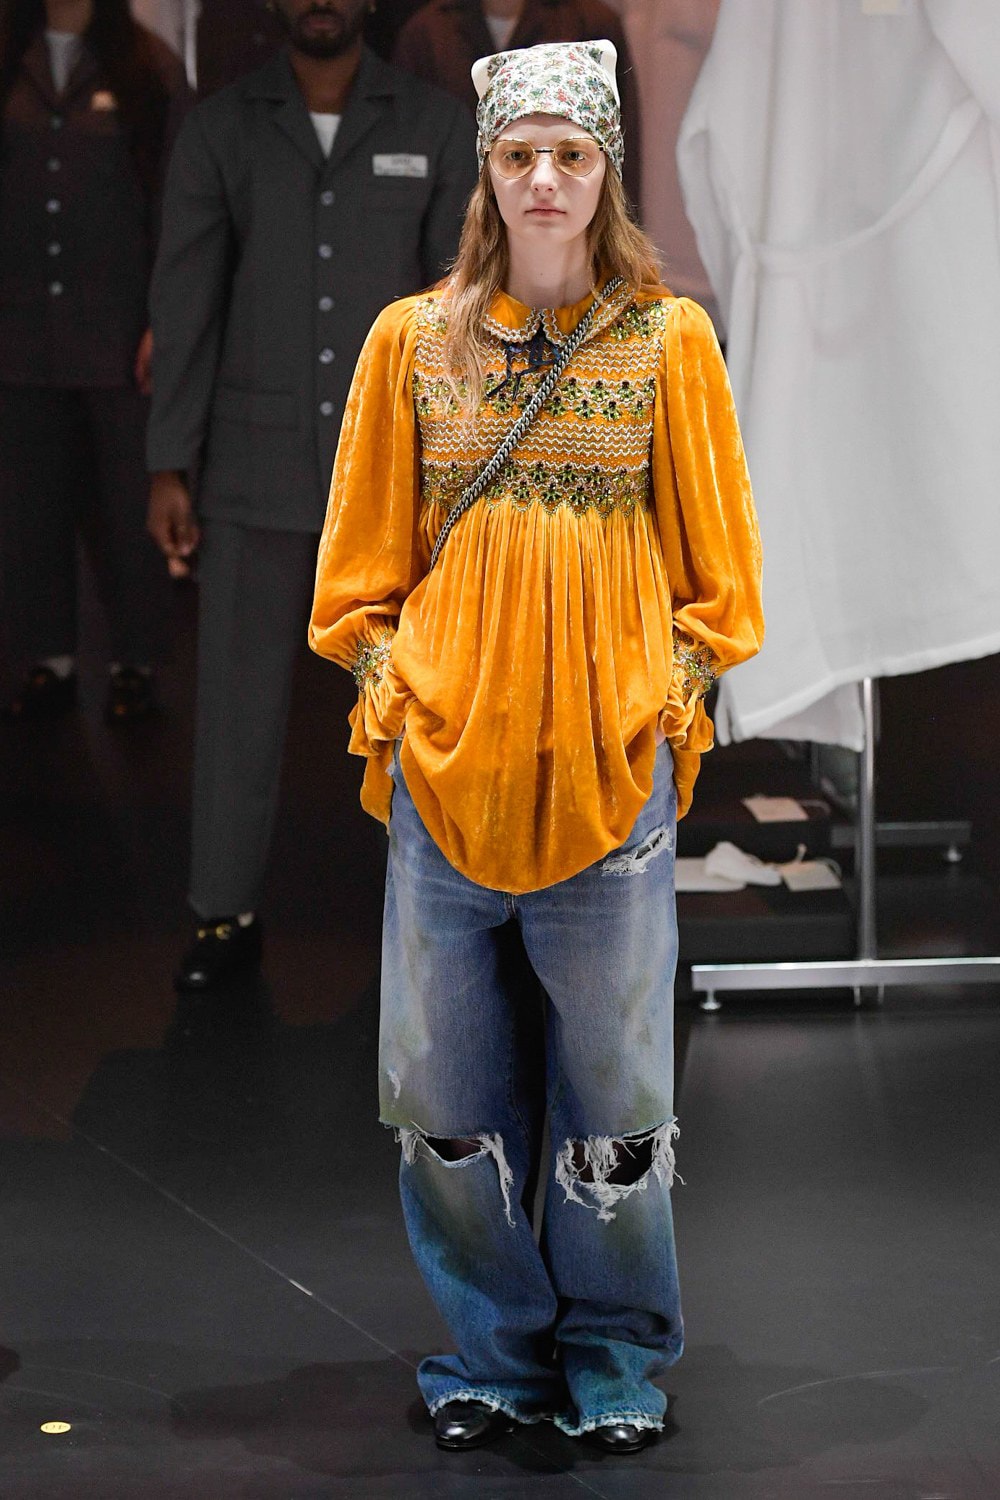 Gucci Fall/Winter 2020 Collection Runway Show Velvet Smock Blouse Orange